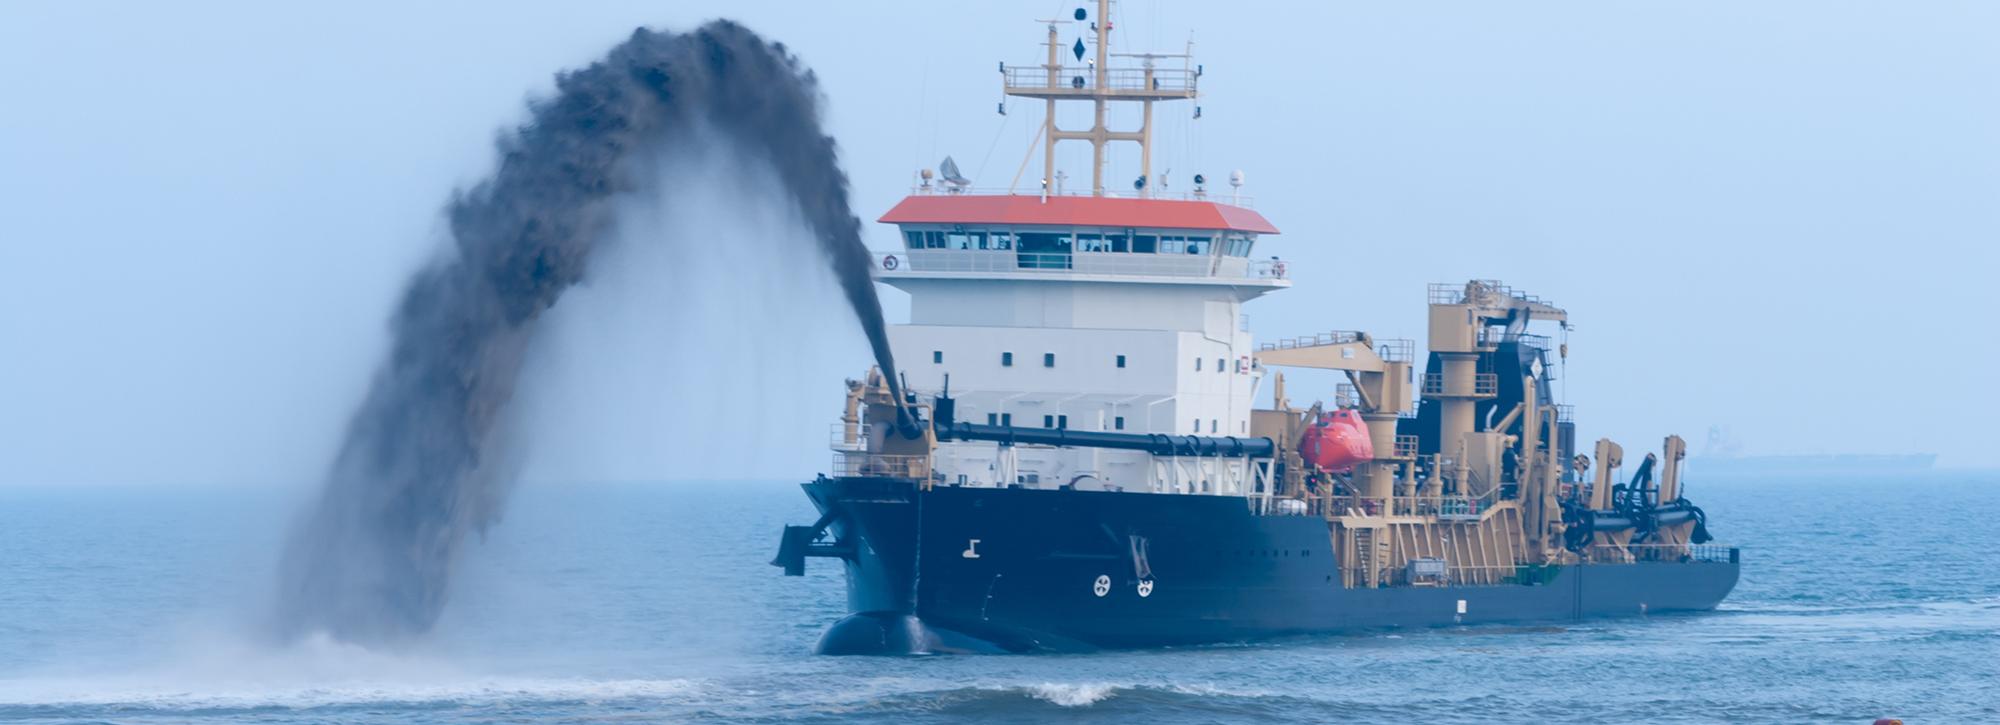 View of a dredger in sea